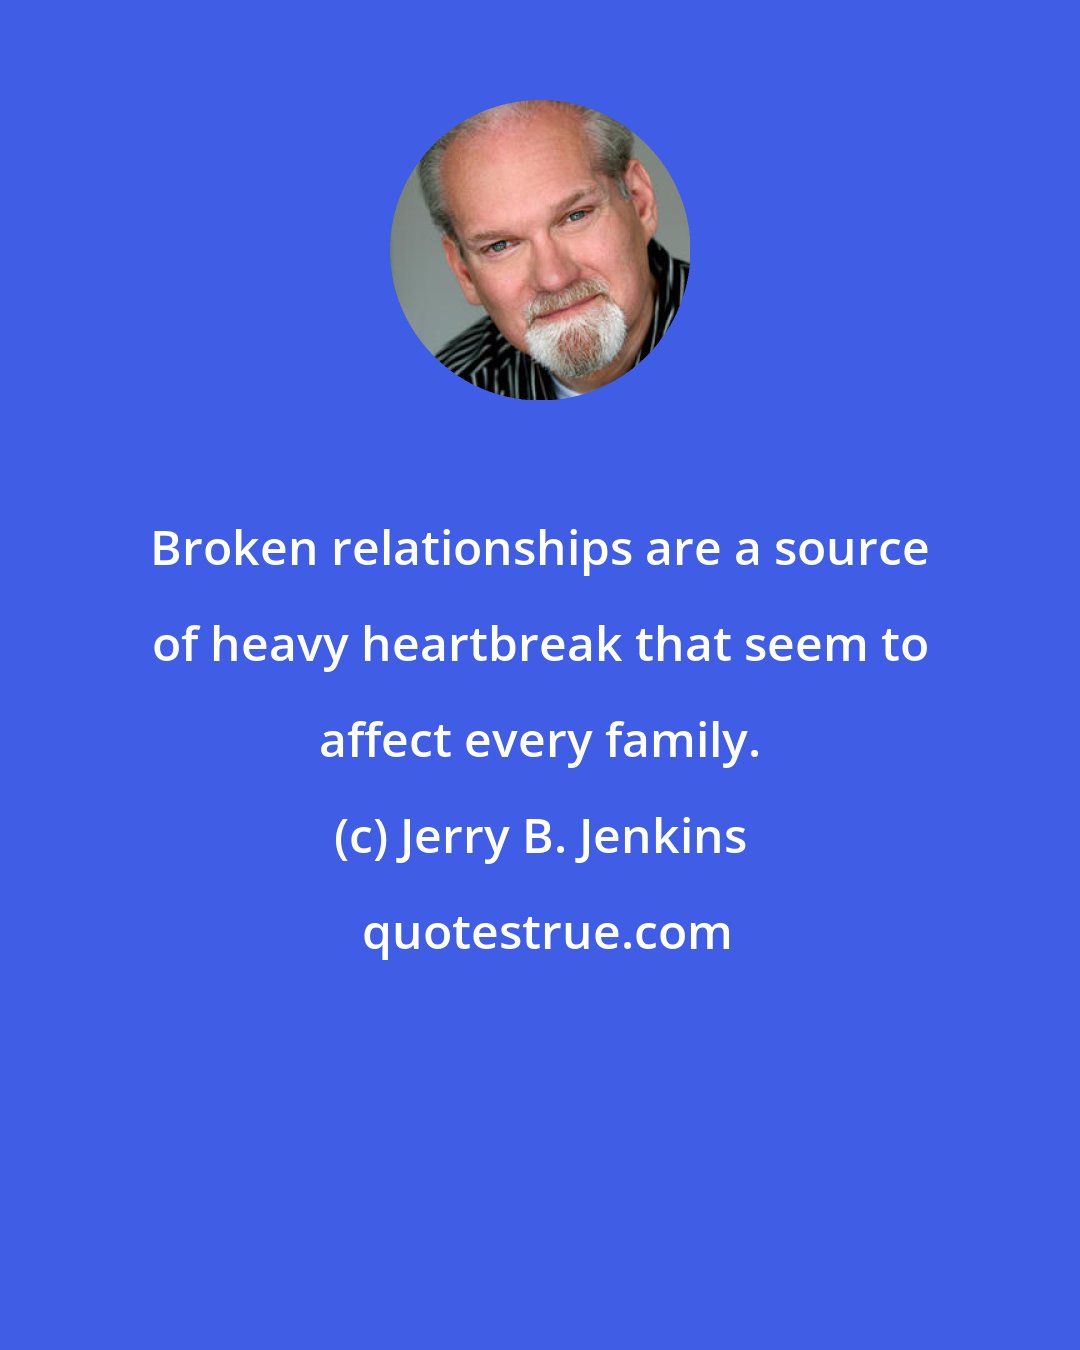 Jerry B. Jenkins: Broken relationships are a source of heavy heartbreak that seem to affect every family.